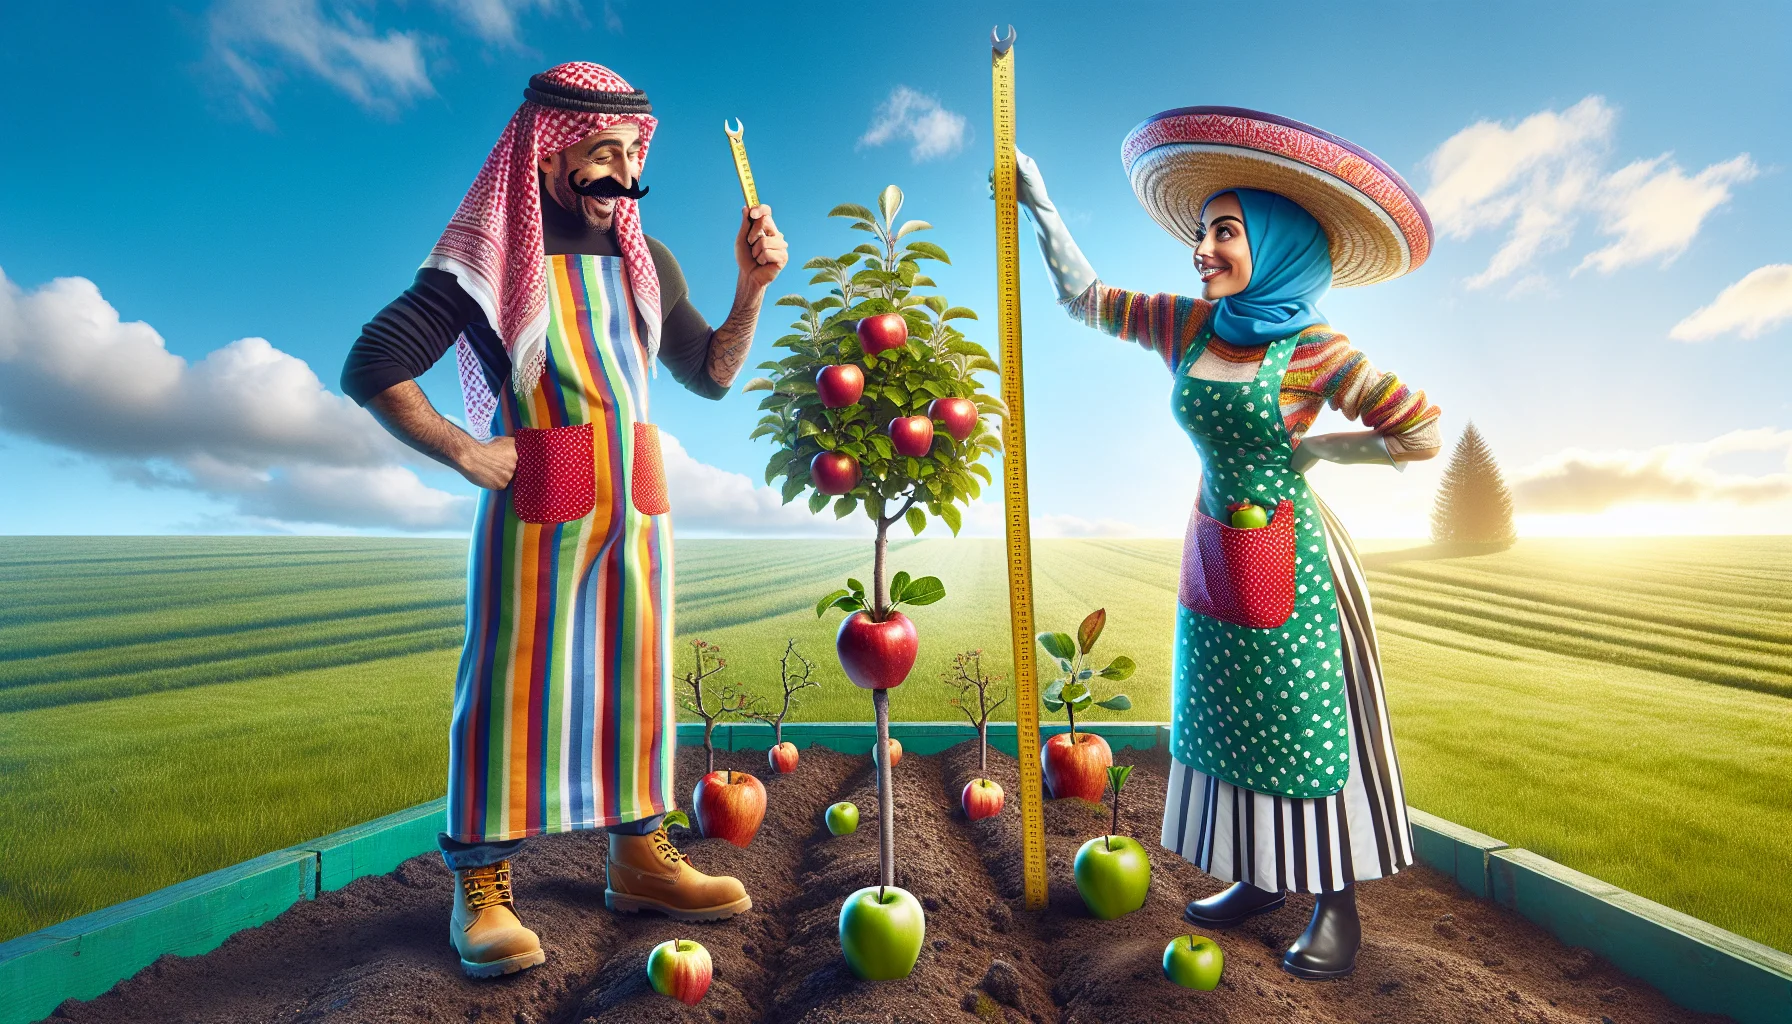 Create a humorous and realistic image showing the progress of an Apple Tree's growth. The scenario at hand involves a Middle-Eastern woman and a Hispanic man who are both gardening enthusiasts, enthusiastically competing to see whose sapling can grow the fastest. They can be seen standing beside their saplings with rulers in hand, measuring the height. They're wearing colorful gardening attire with mismatched combinations and silly hats, which accentuates the humor. The backdrop comprises a sunny day and a bright blue sky, reflecting a perfect day for gardening. The image should aim to convey a sense of enjoyment and connection with nature.